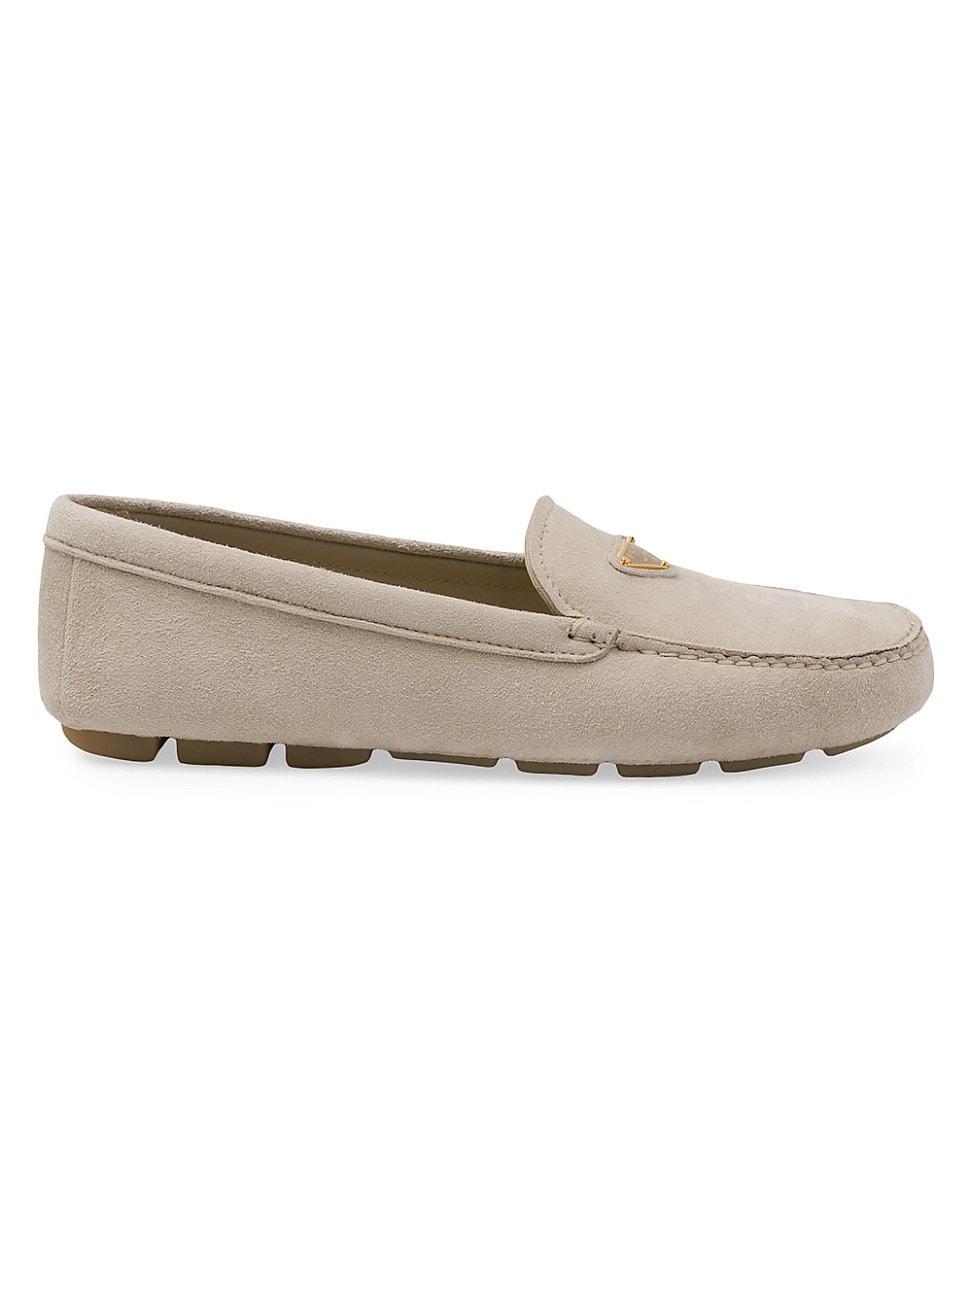 Womens Suede Driving Loafers Product Image